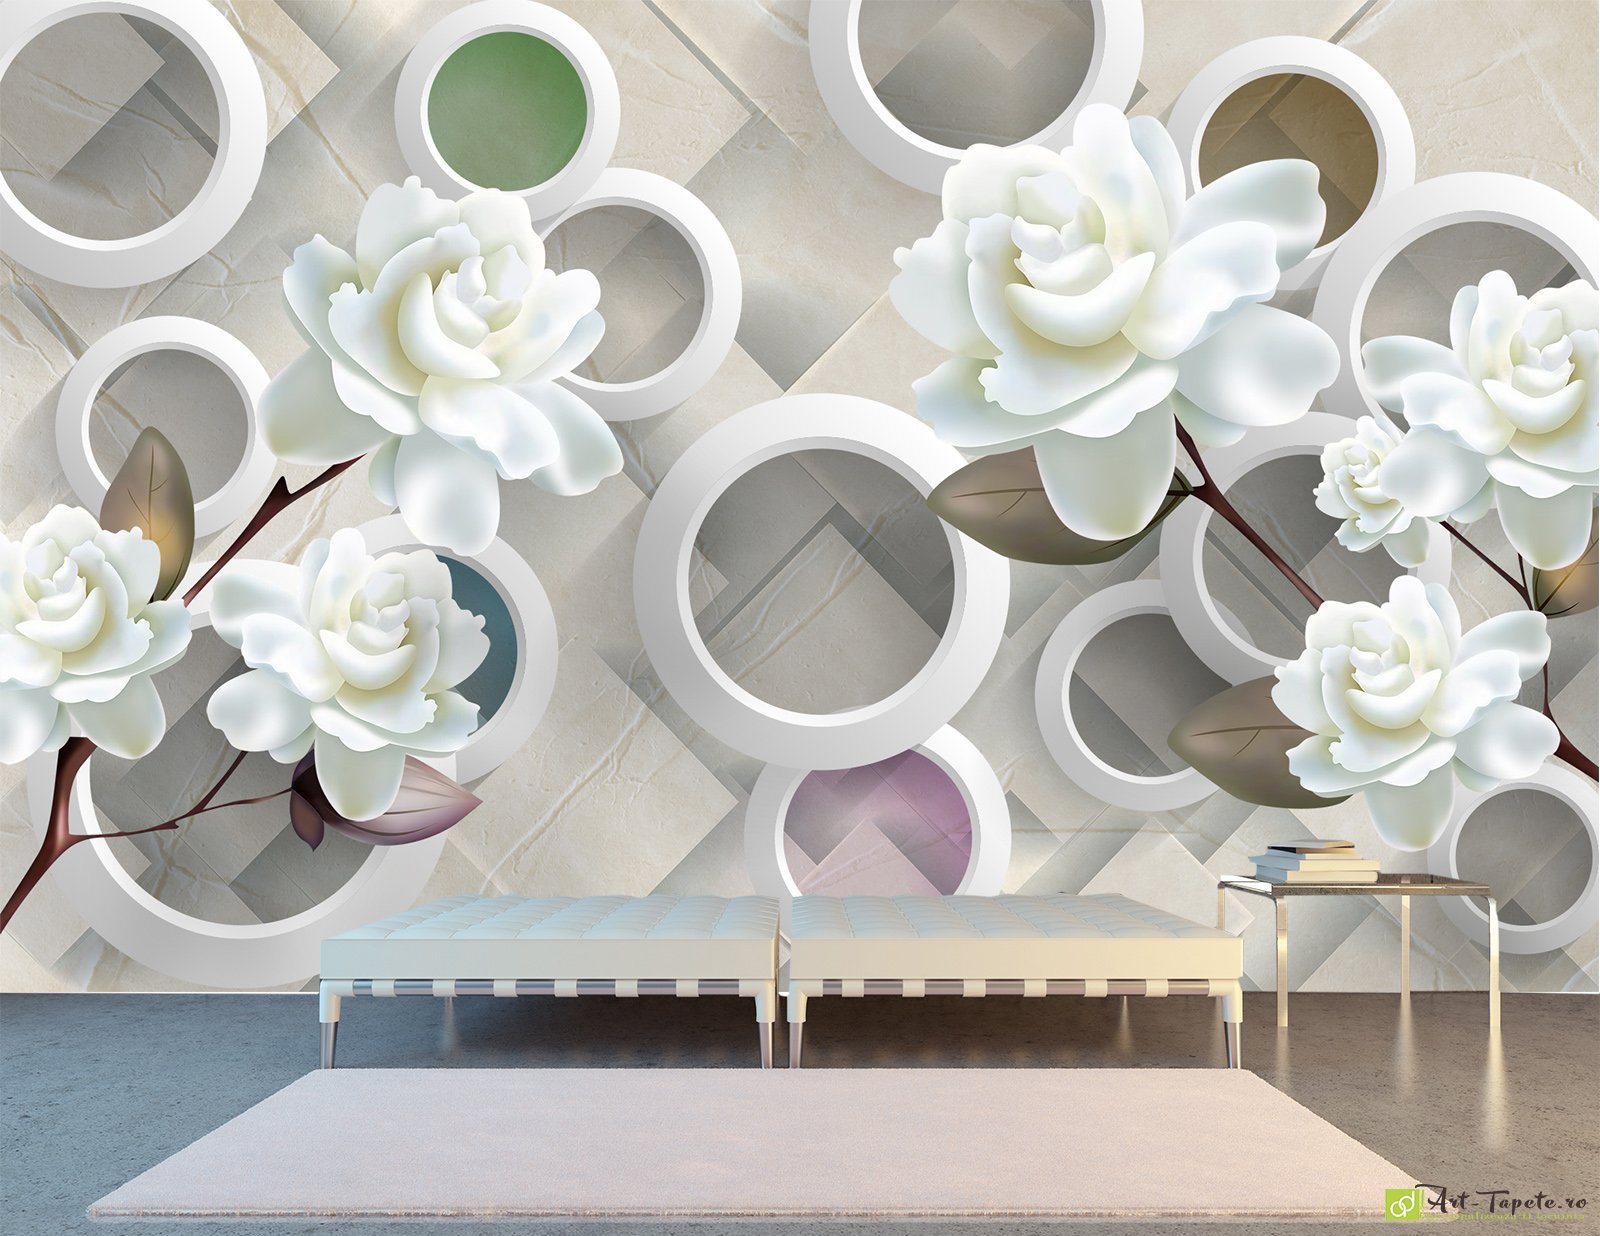 Photo Wallpaper 3D Effect - Circles, white flowers  3D  Effect The best selection of wall murals and photo murals Buy Online